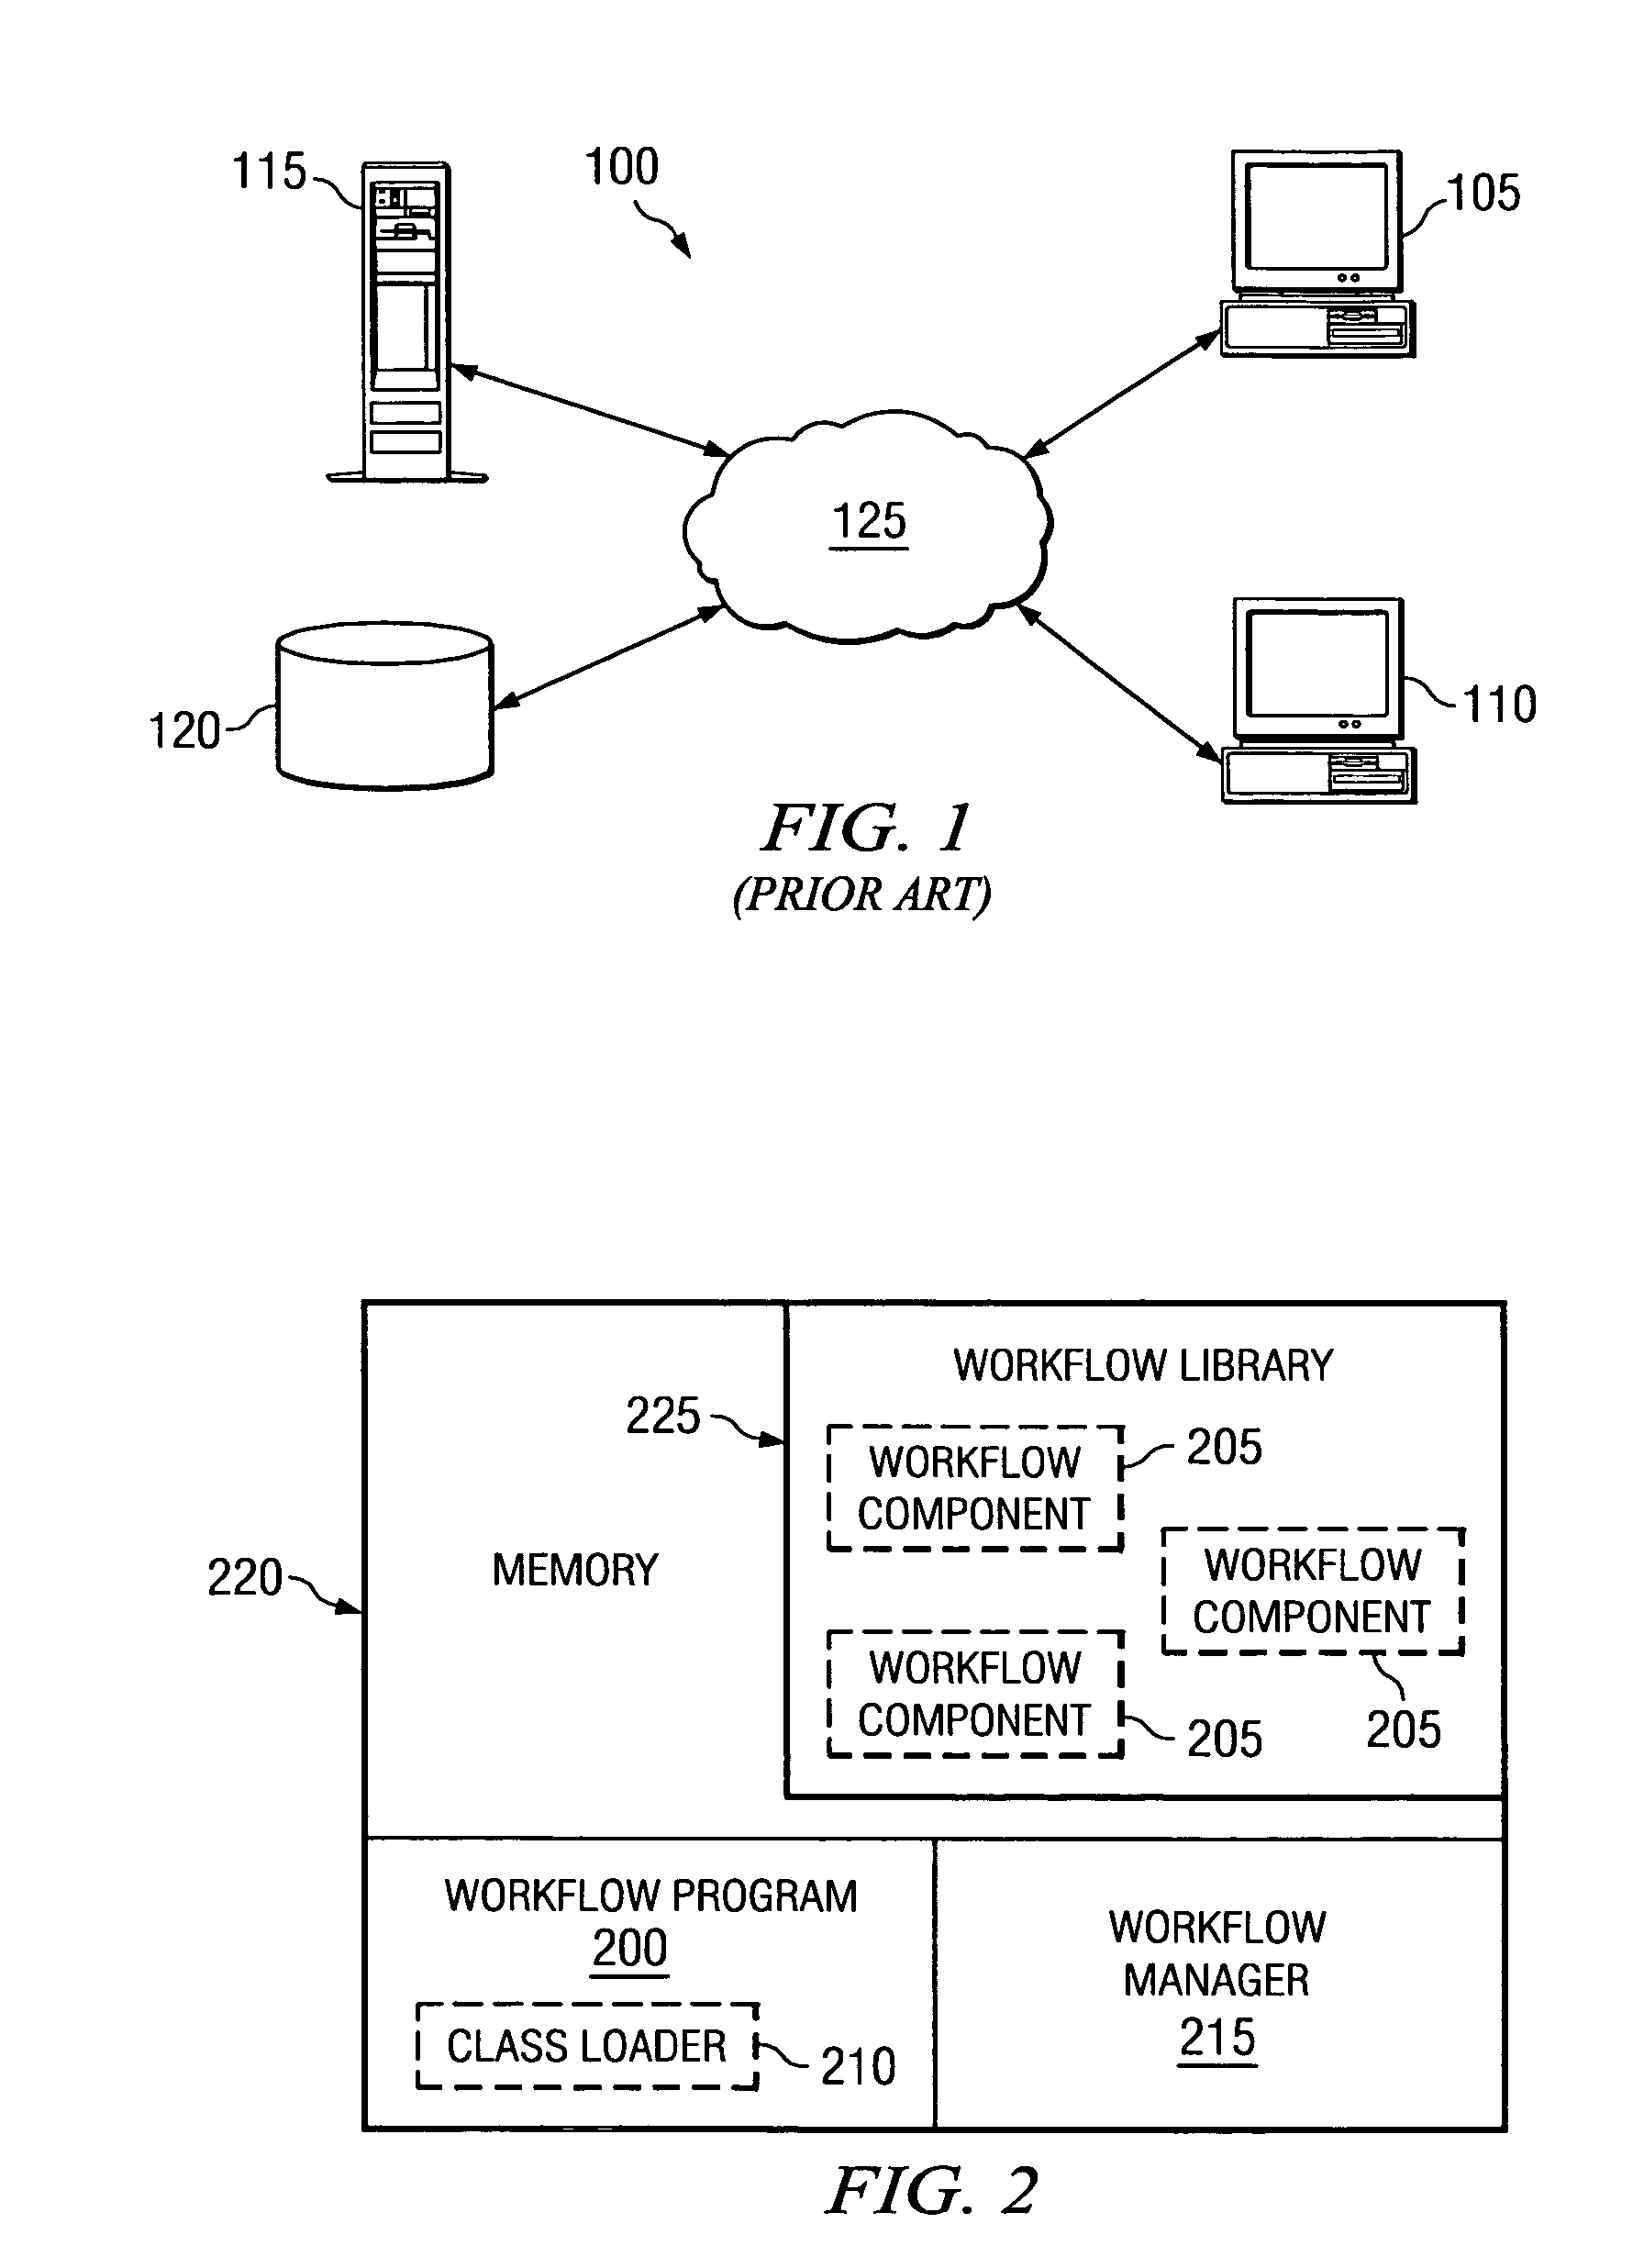 Workflow application having linked workflow components